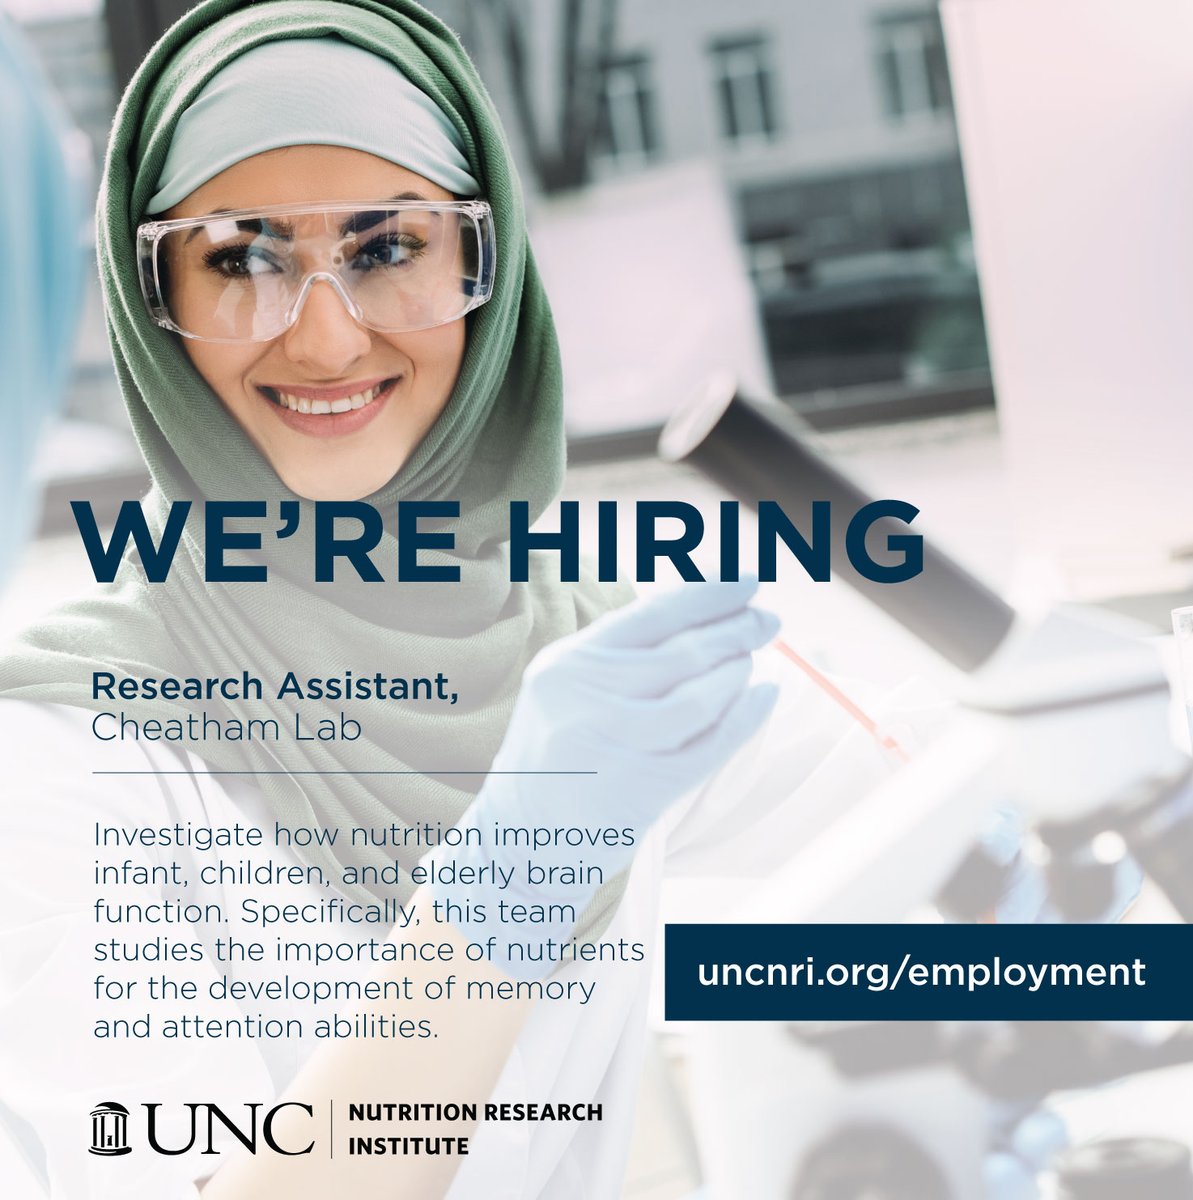 Our team is growing! Hiring: Research Assistant to help investigate how nutrition improves infant, children and elderly brain function.
unc.peopleadmin.com/postings/259526
#jobopportunity #employment #hiring #researchjobs #sciencejobs #STEMjobs #nutritionjobs #health #diet